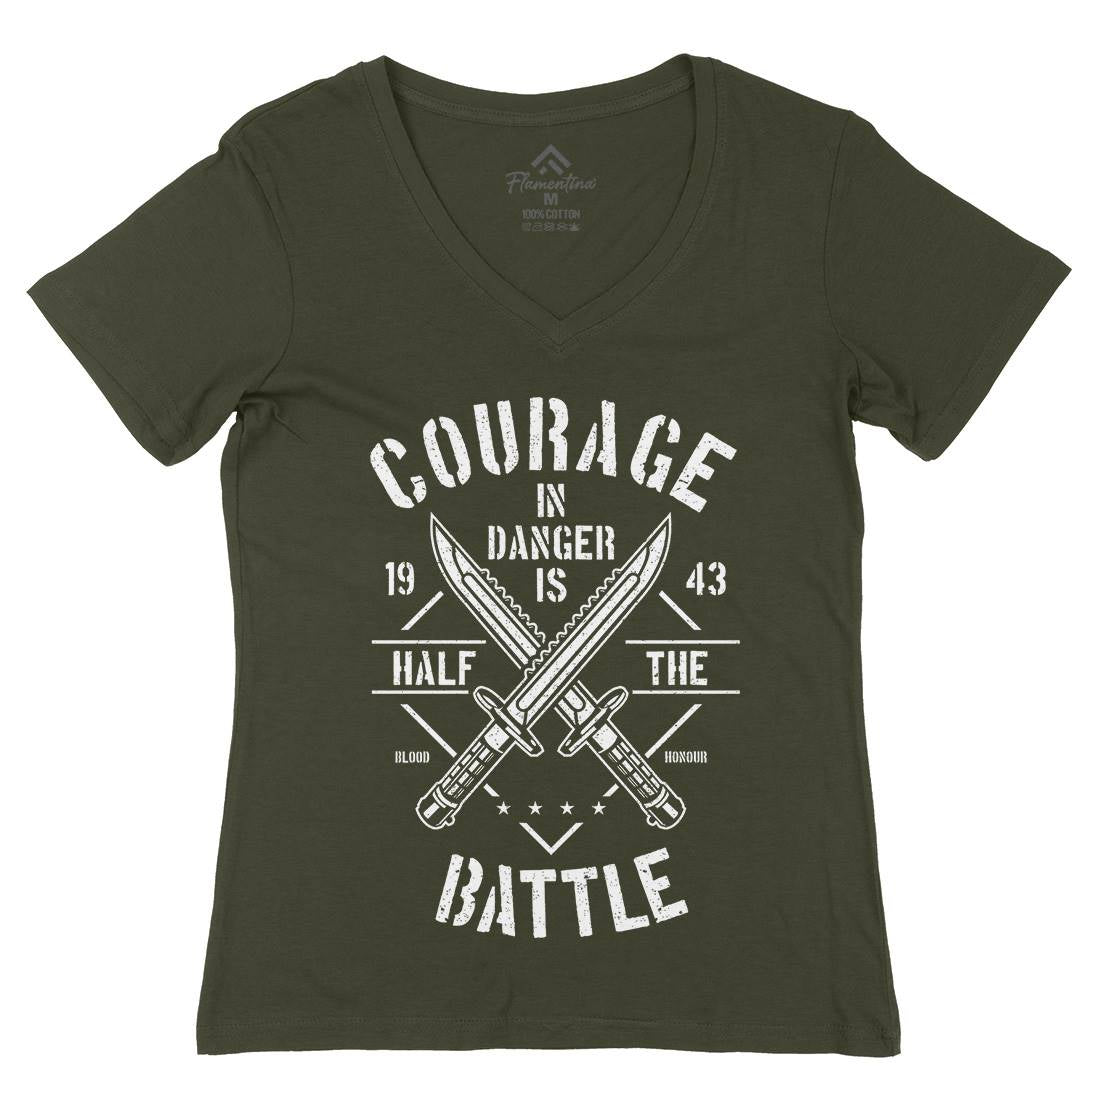 Courage In Danger Womens Organic V-Neck T-Shirt Army A639